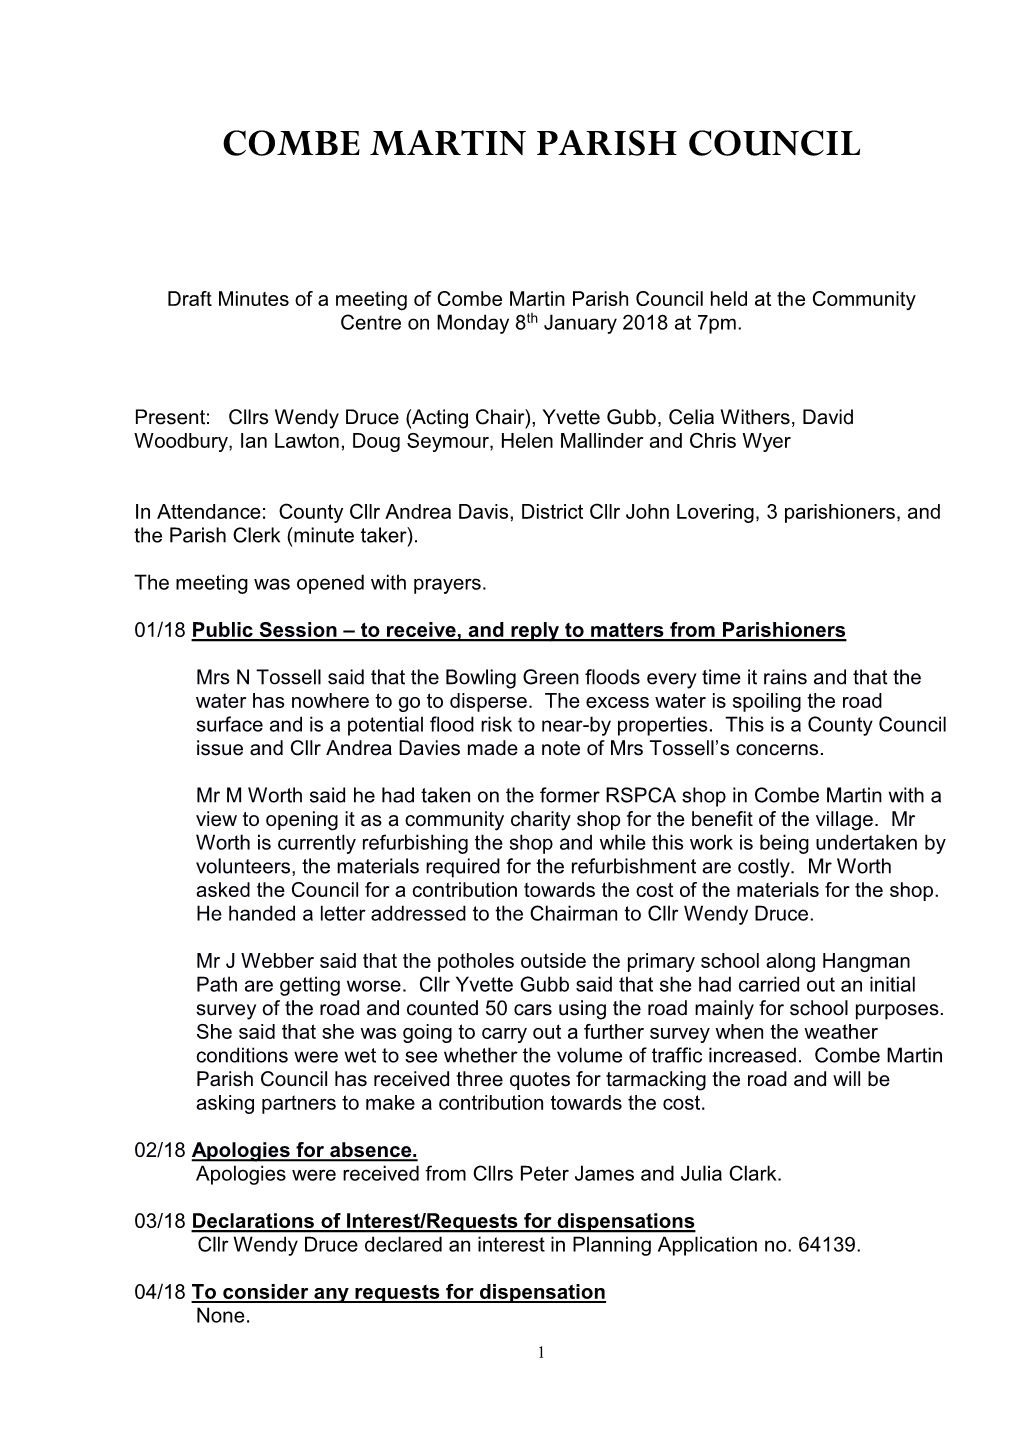 Minutes of a Meeting of Combe Martin Parish Council Held at the Community Centre on Monday 8Th January 2018 at 7Pm